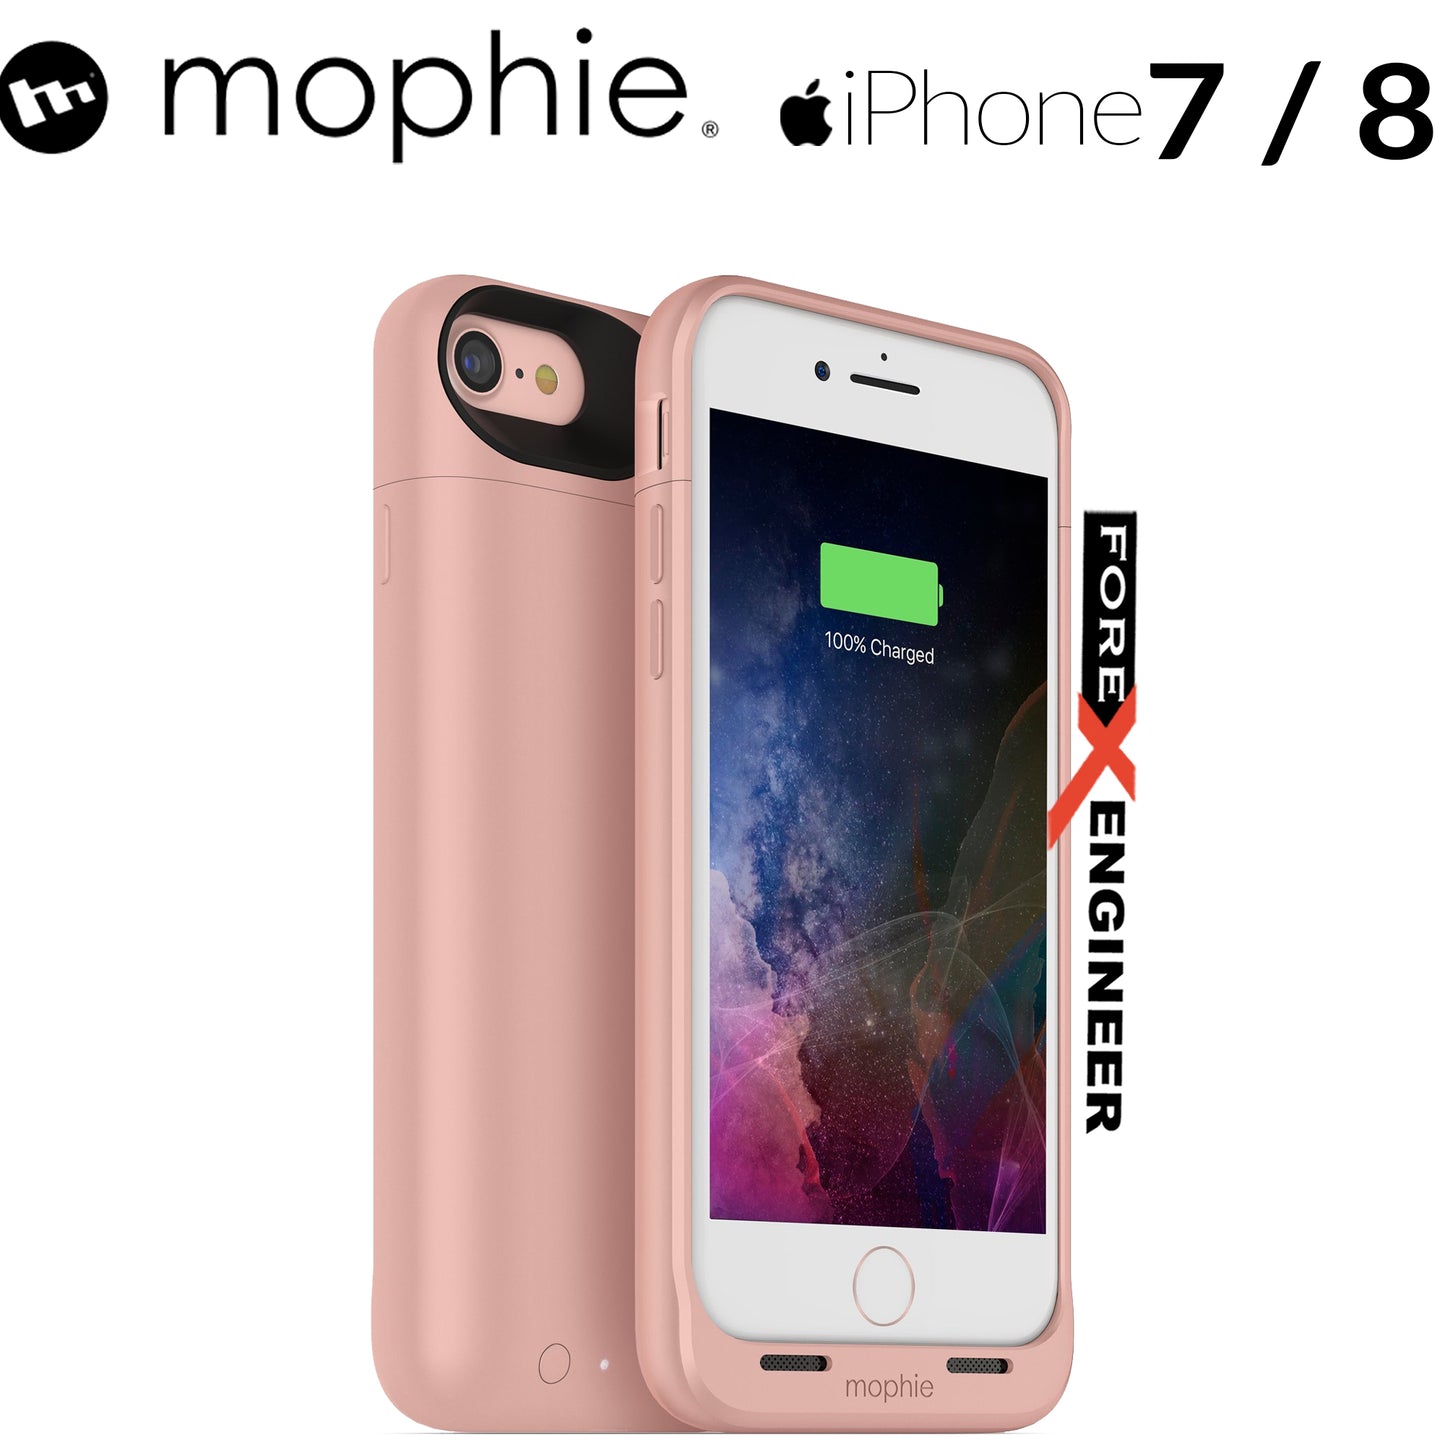 Mophie Juice Pack air for iphone 7 - 8 - rose gold color (wireless charge capable) (Compatible with iPhone SE 2nd Gen 2020)